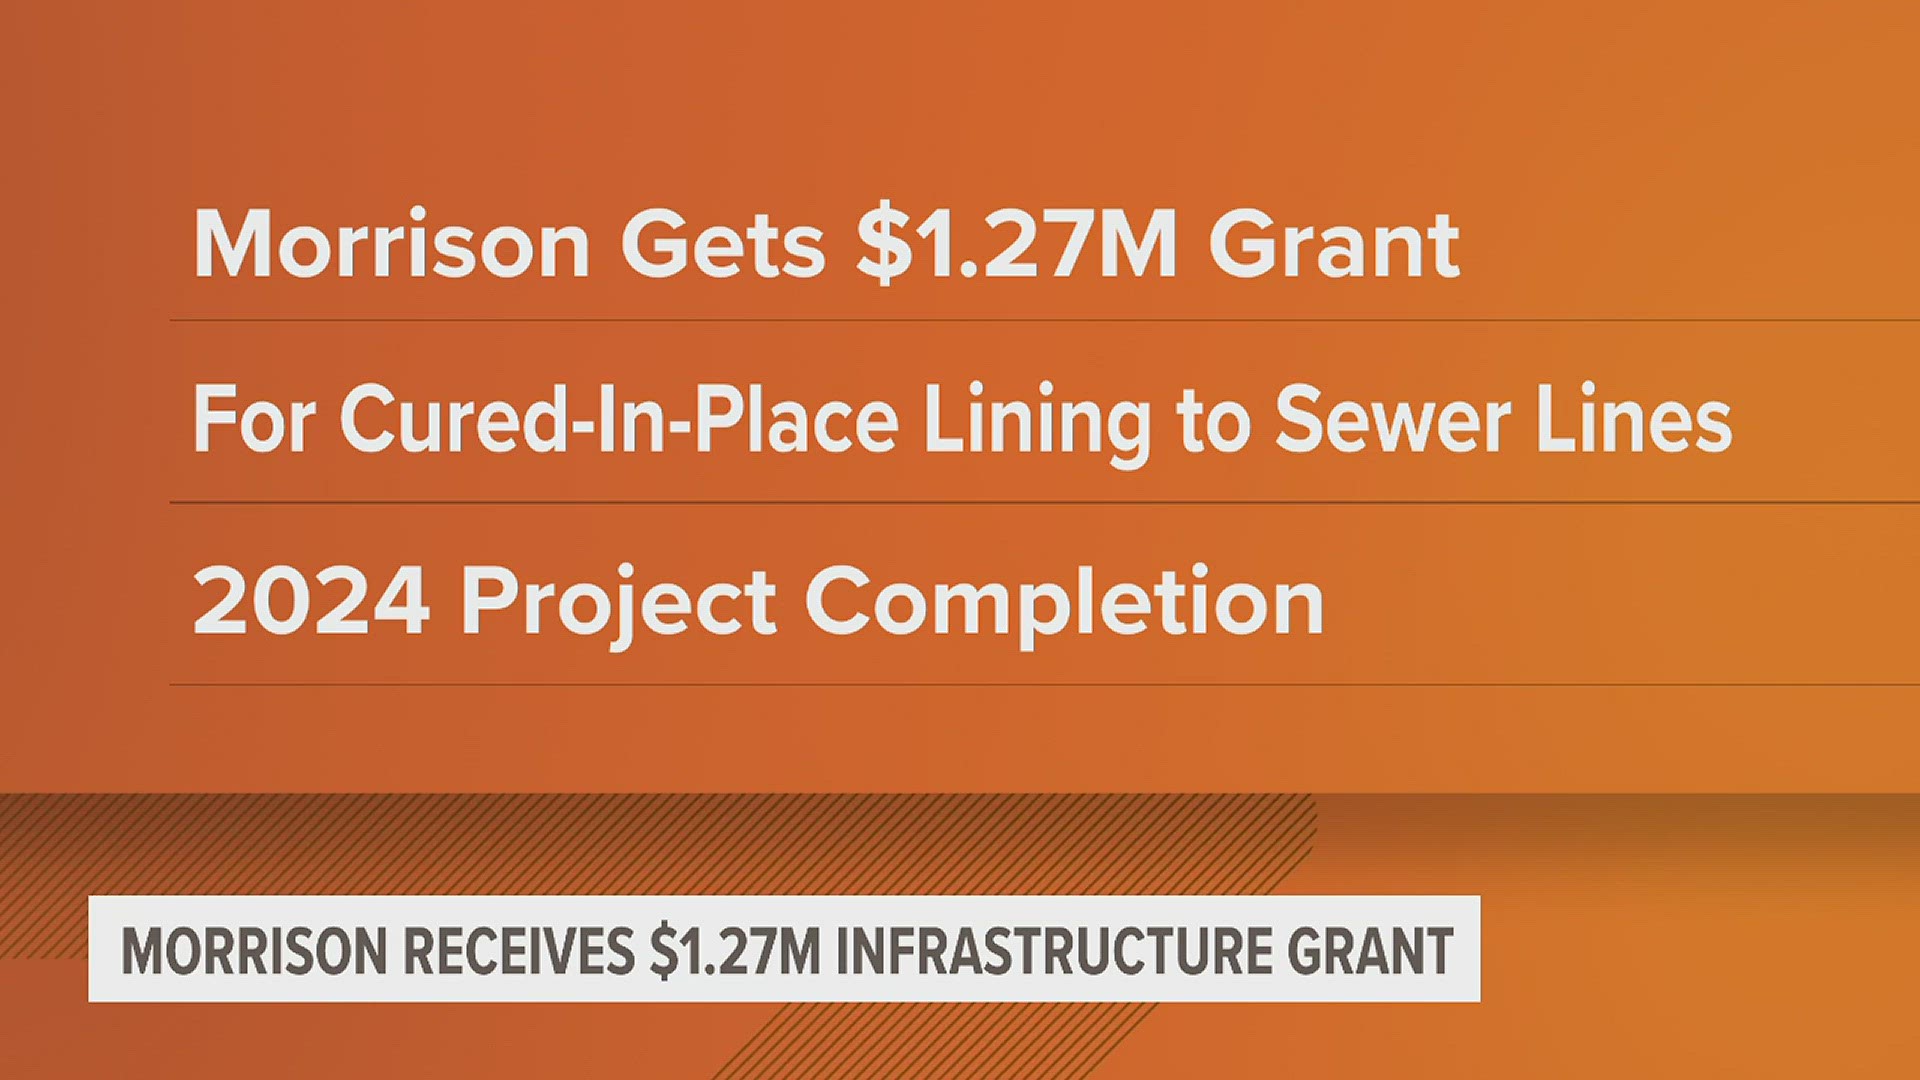 The city of Morrison is receiving a $1.27 million grant to improve the sewer system in the city. The proposed project is part of a multi-phase initiative.